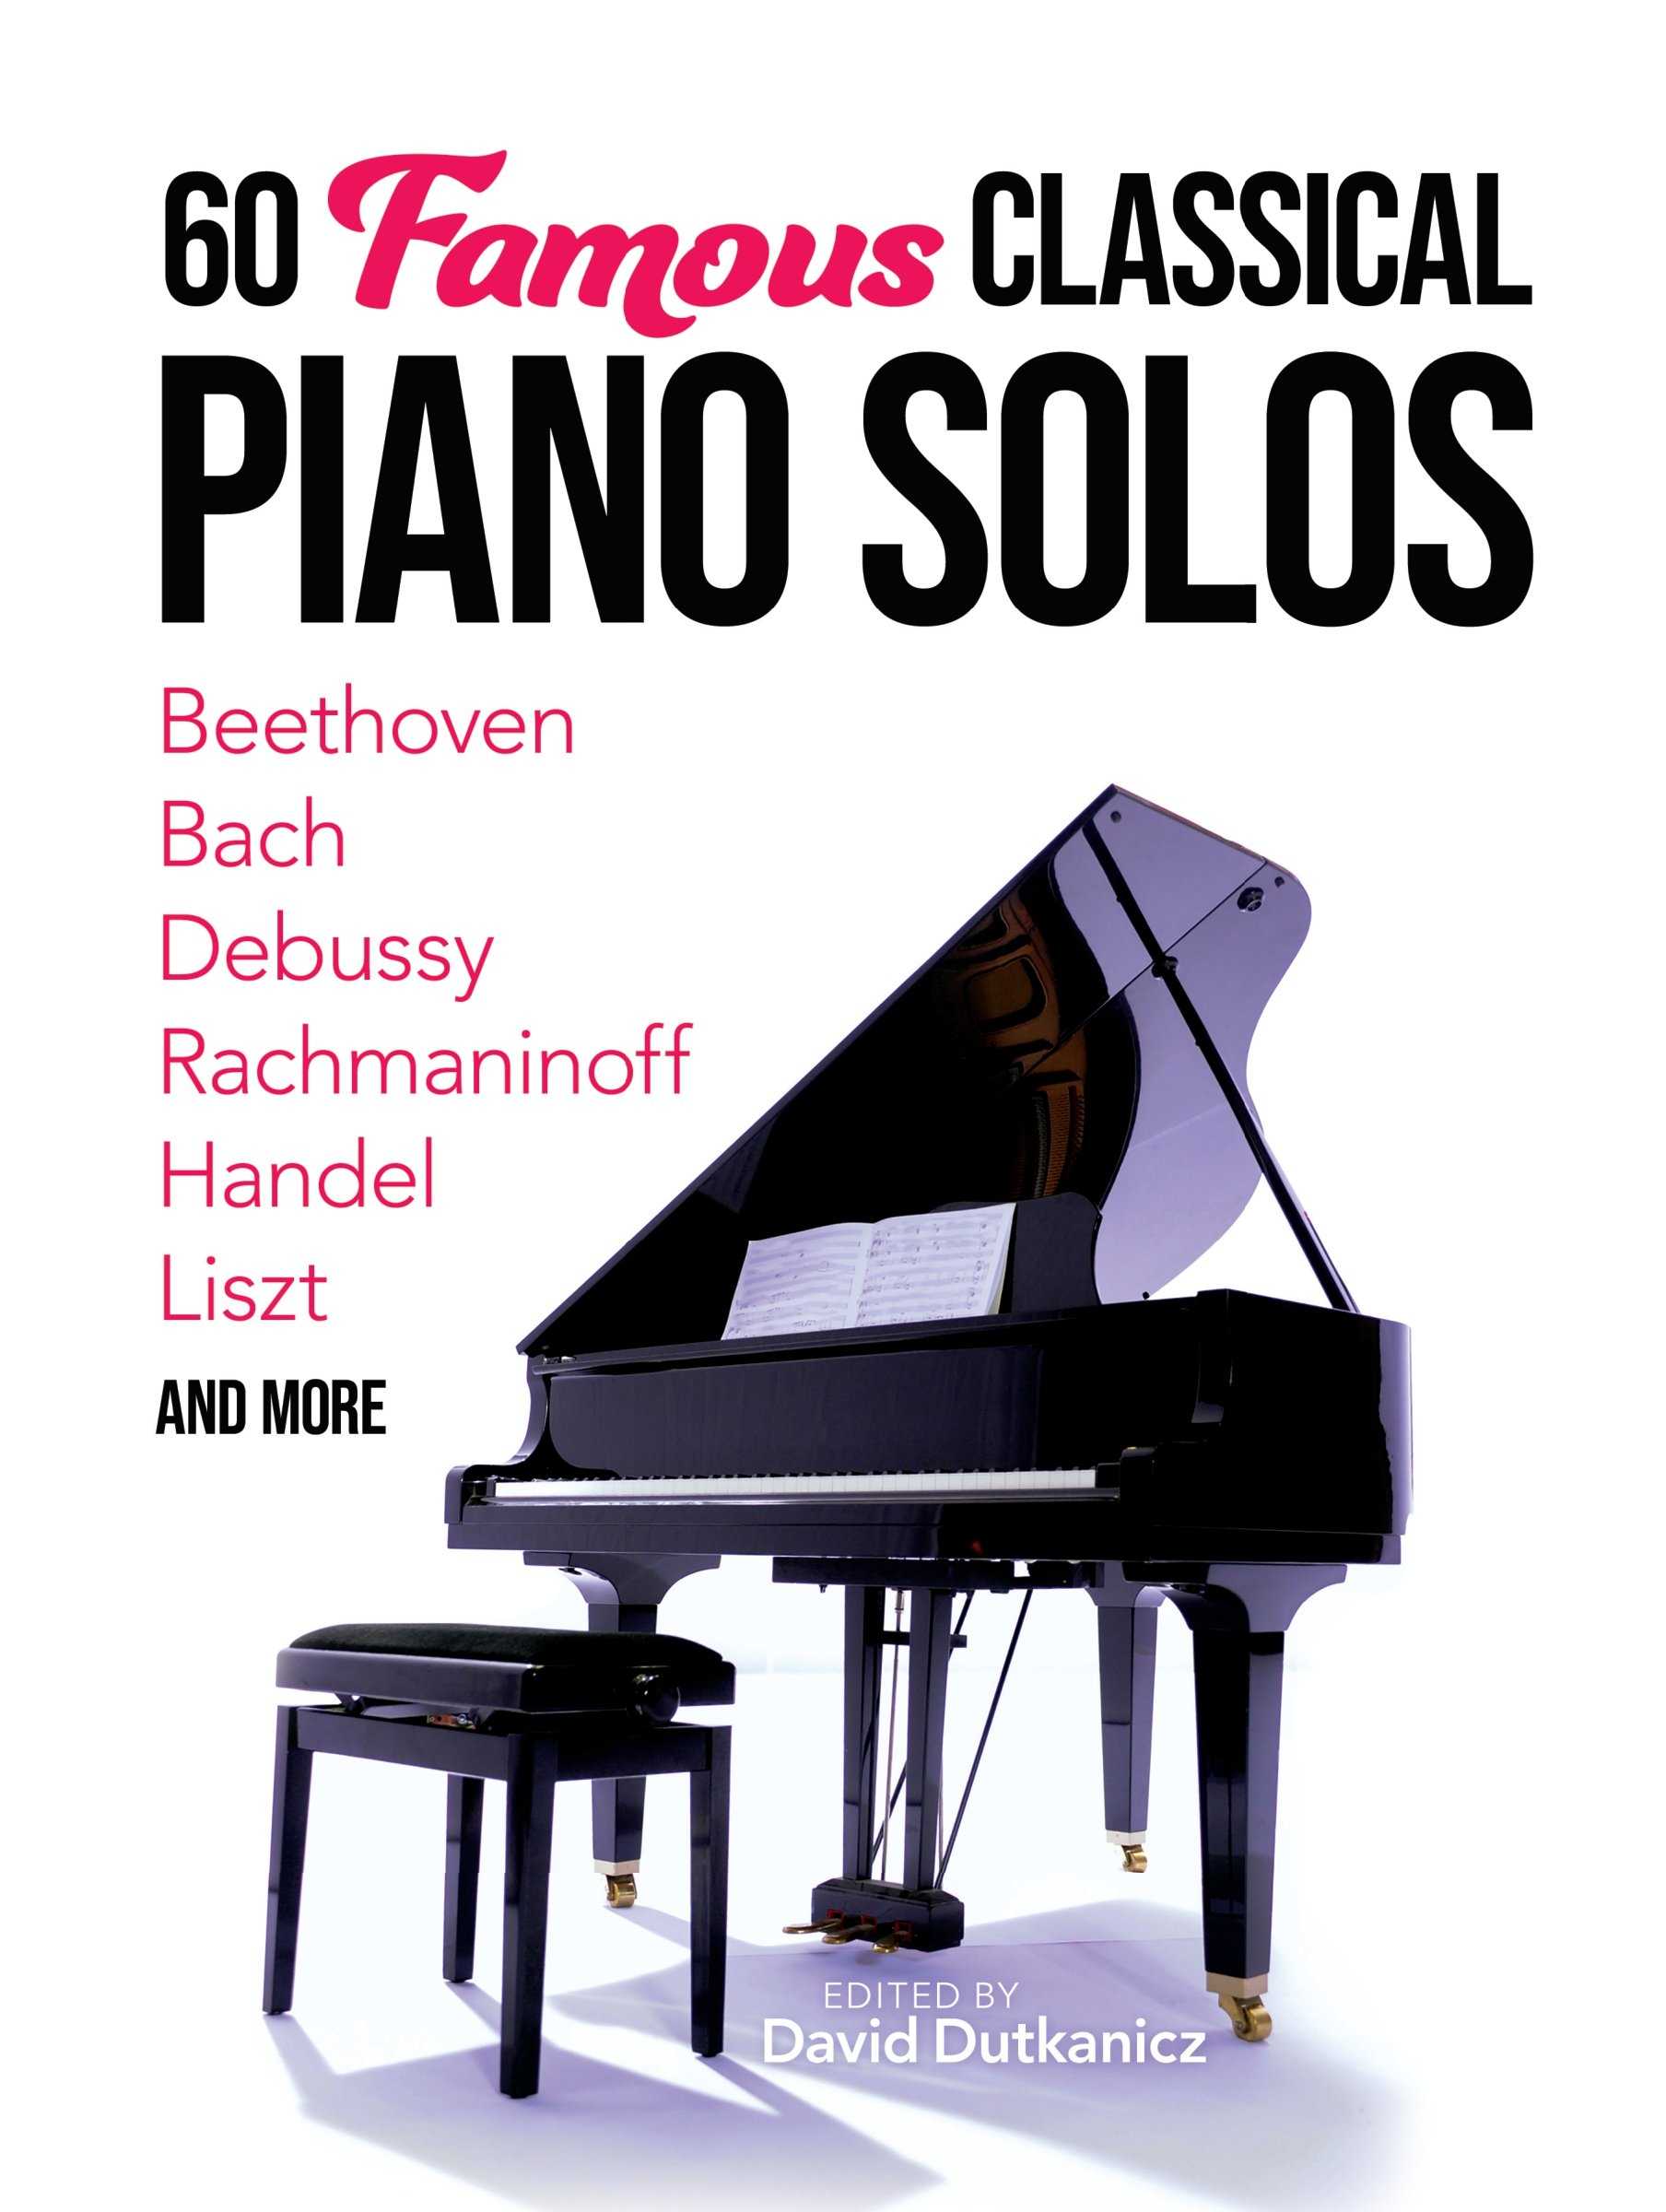 60 Famous Classical Piano Solos Beethoven, Bach, Debussy, Rachmaninoff, Handel, Liszt and more